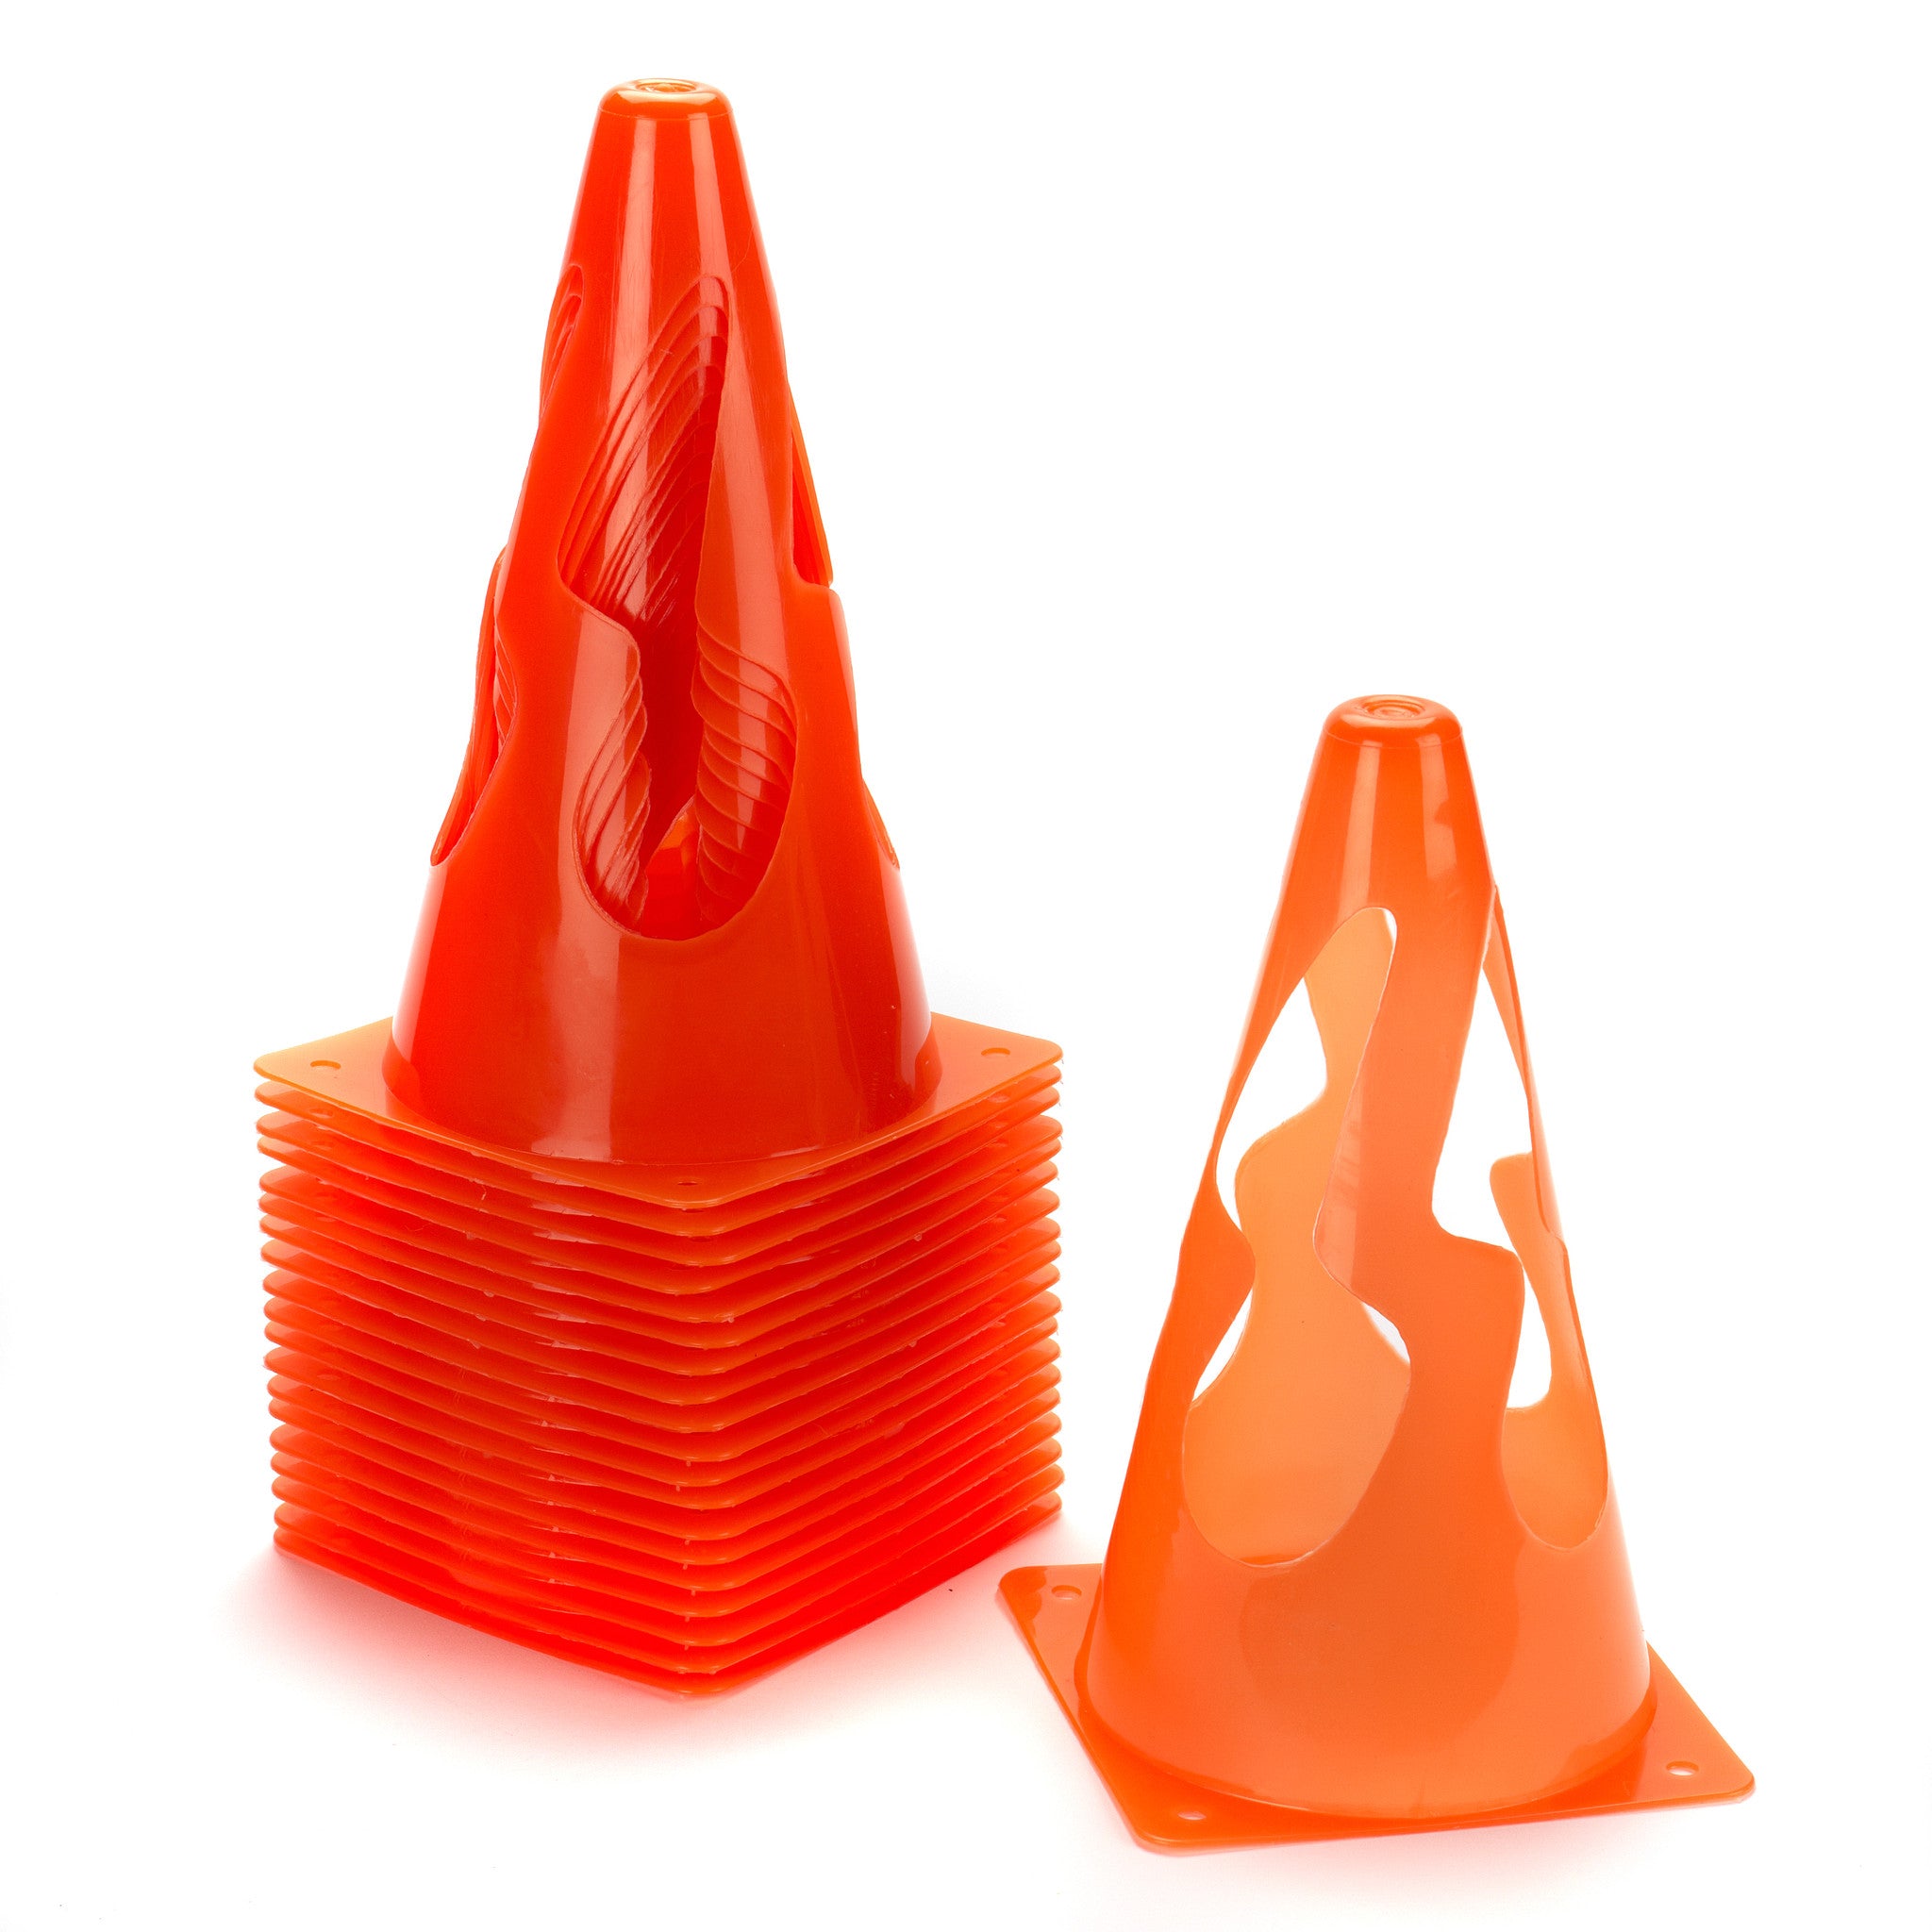 Bright orange collapsible sports marker cones in a set of 10. Highly visible on court.